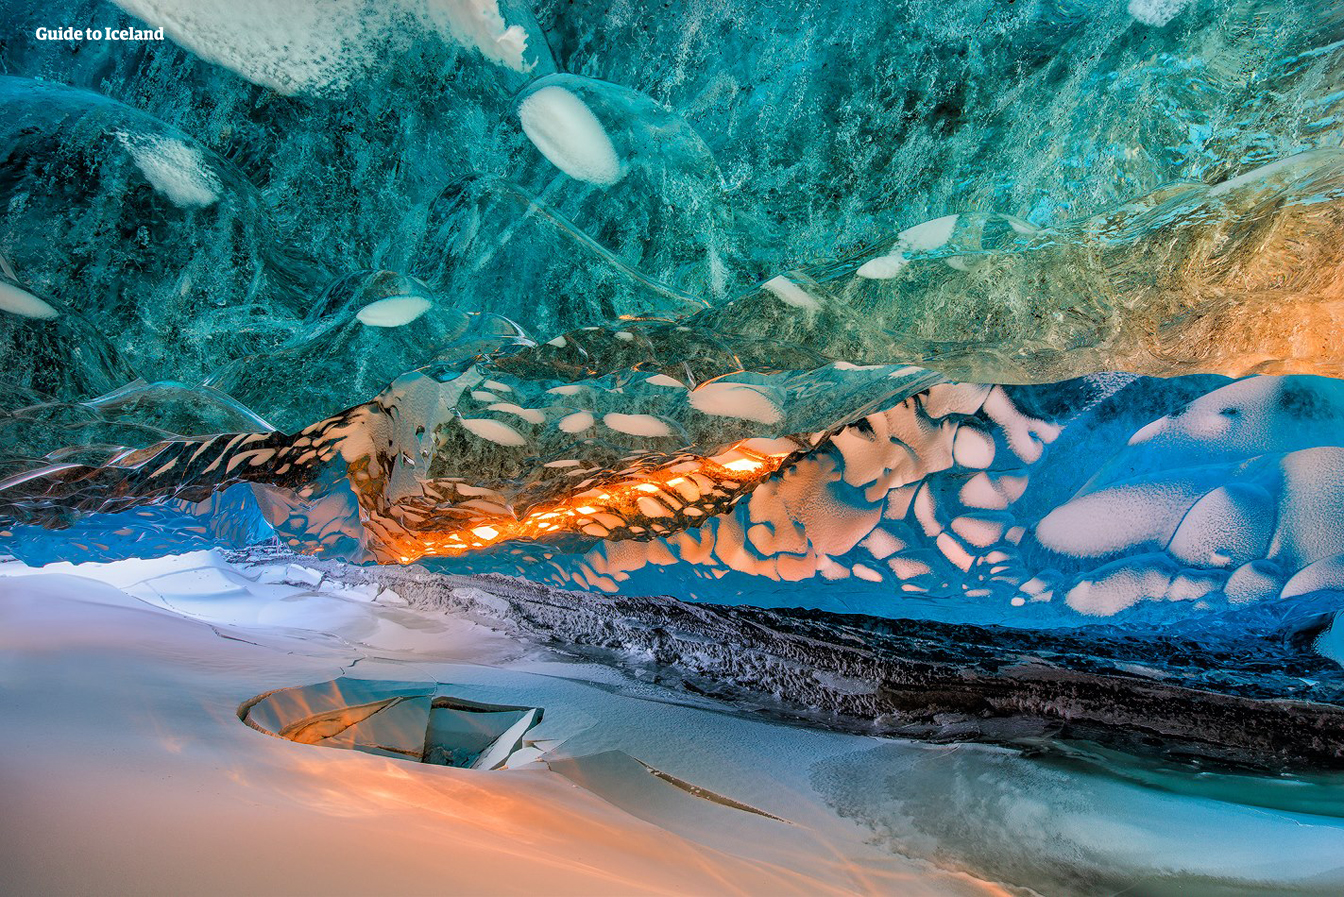 Only accessible in winter time, Iceland's ice caves await travellers thirsting for wonder and amazement.